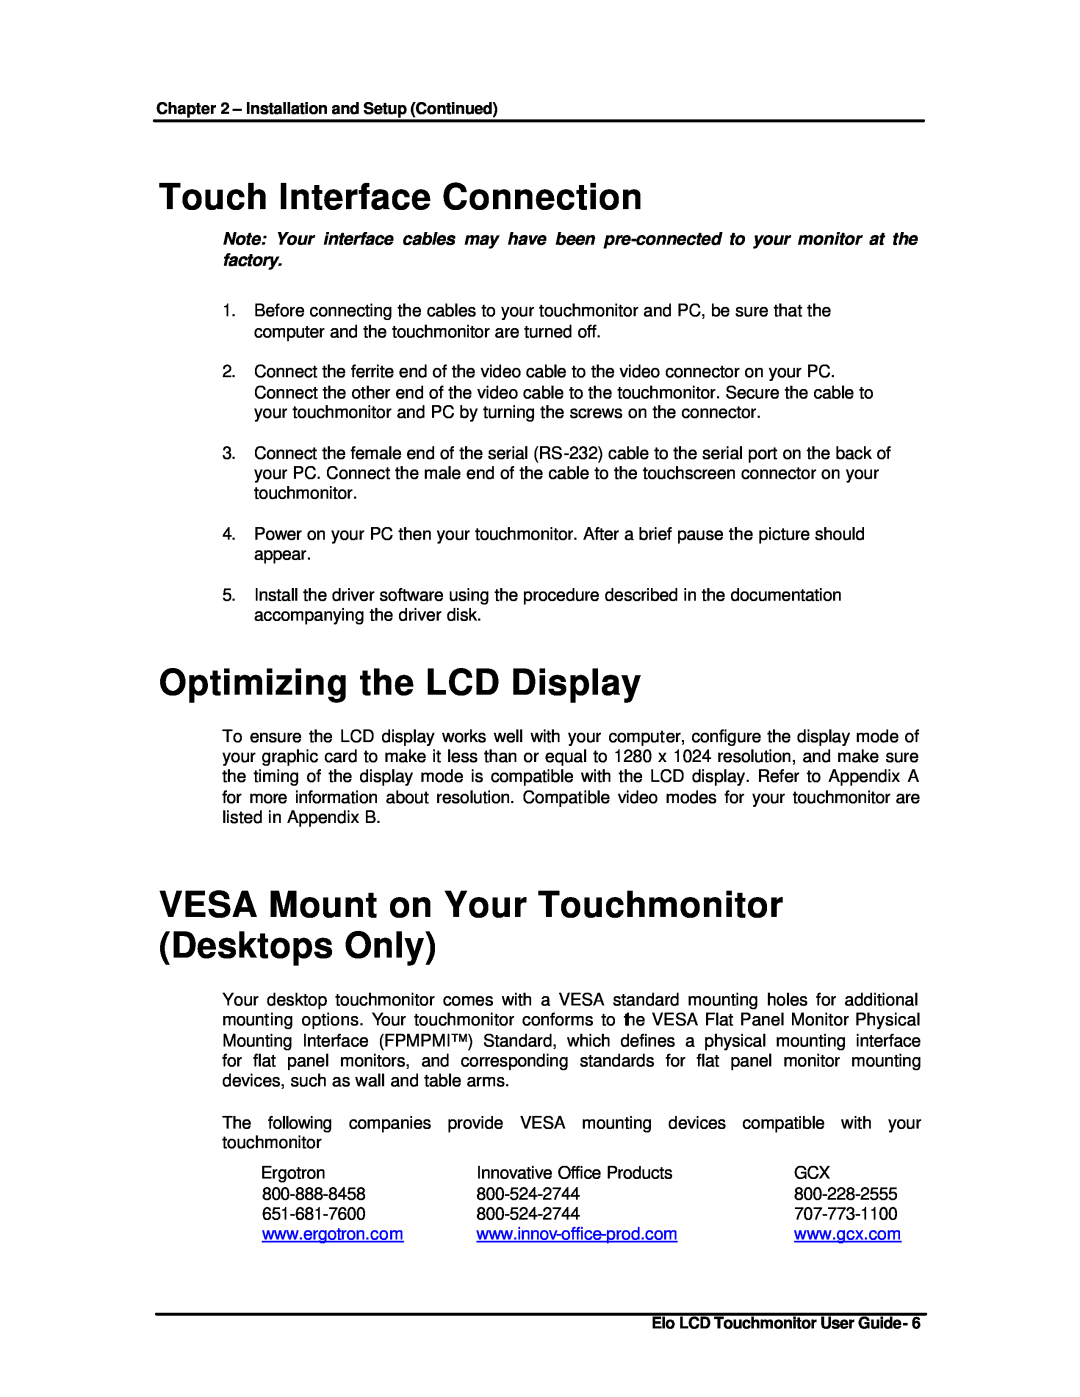 Elo TouchSystems ET1825L-8SWA-1 manual Touch Interface Connection, Optimizing the LCD Display 